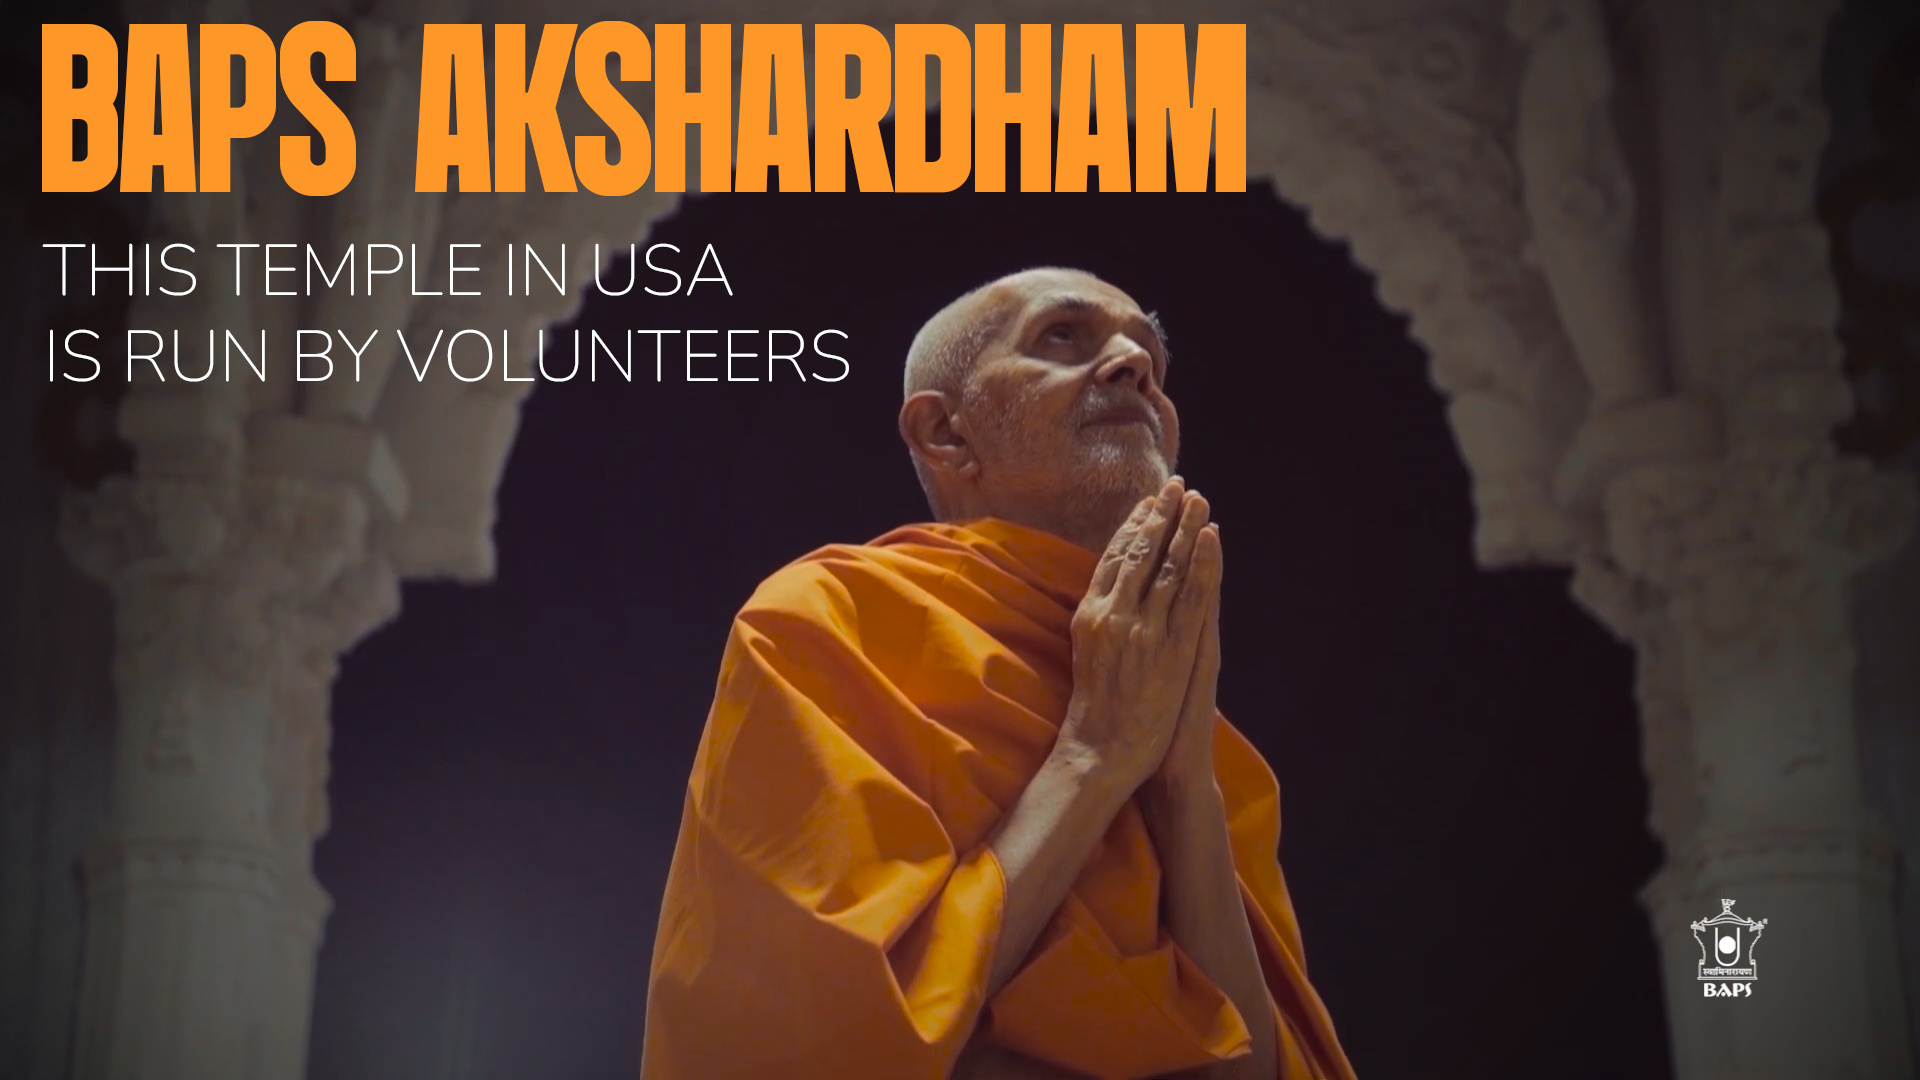 People are amazed that the temple is run by volunteers, says BAPS Akshardham USA Head